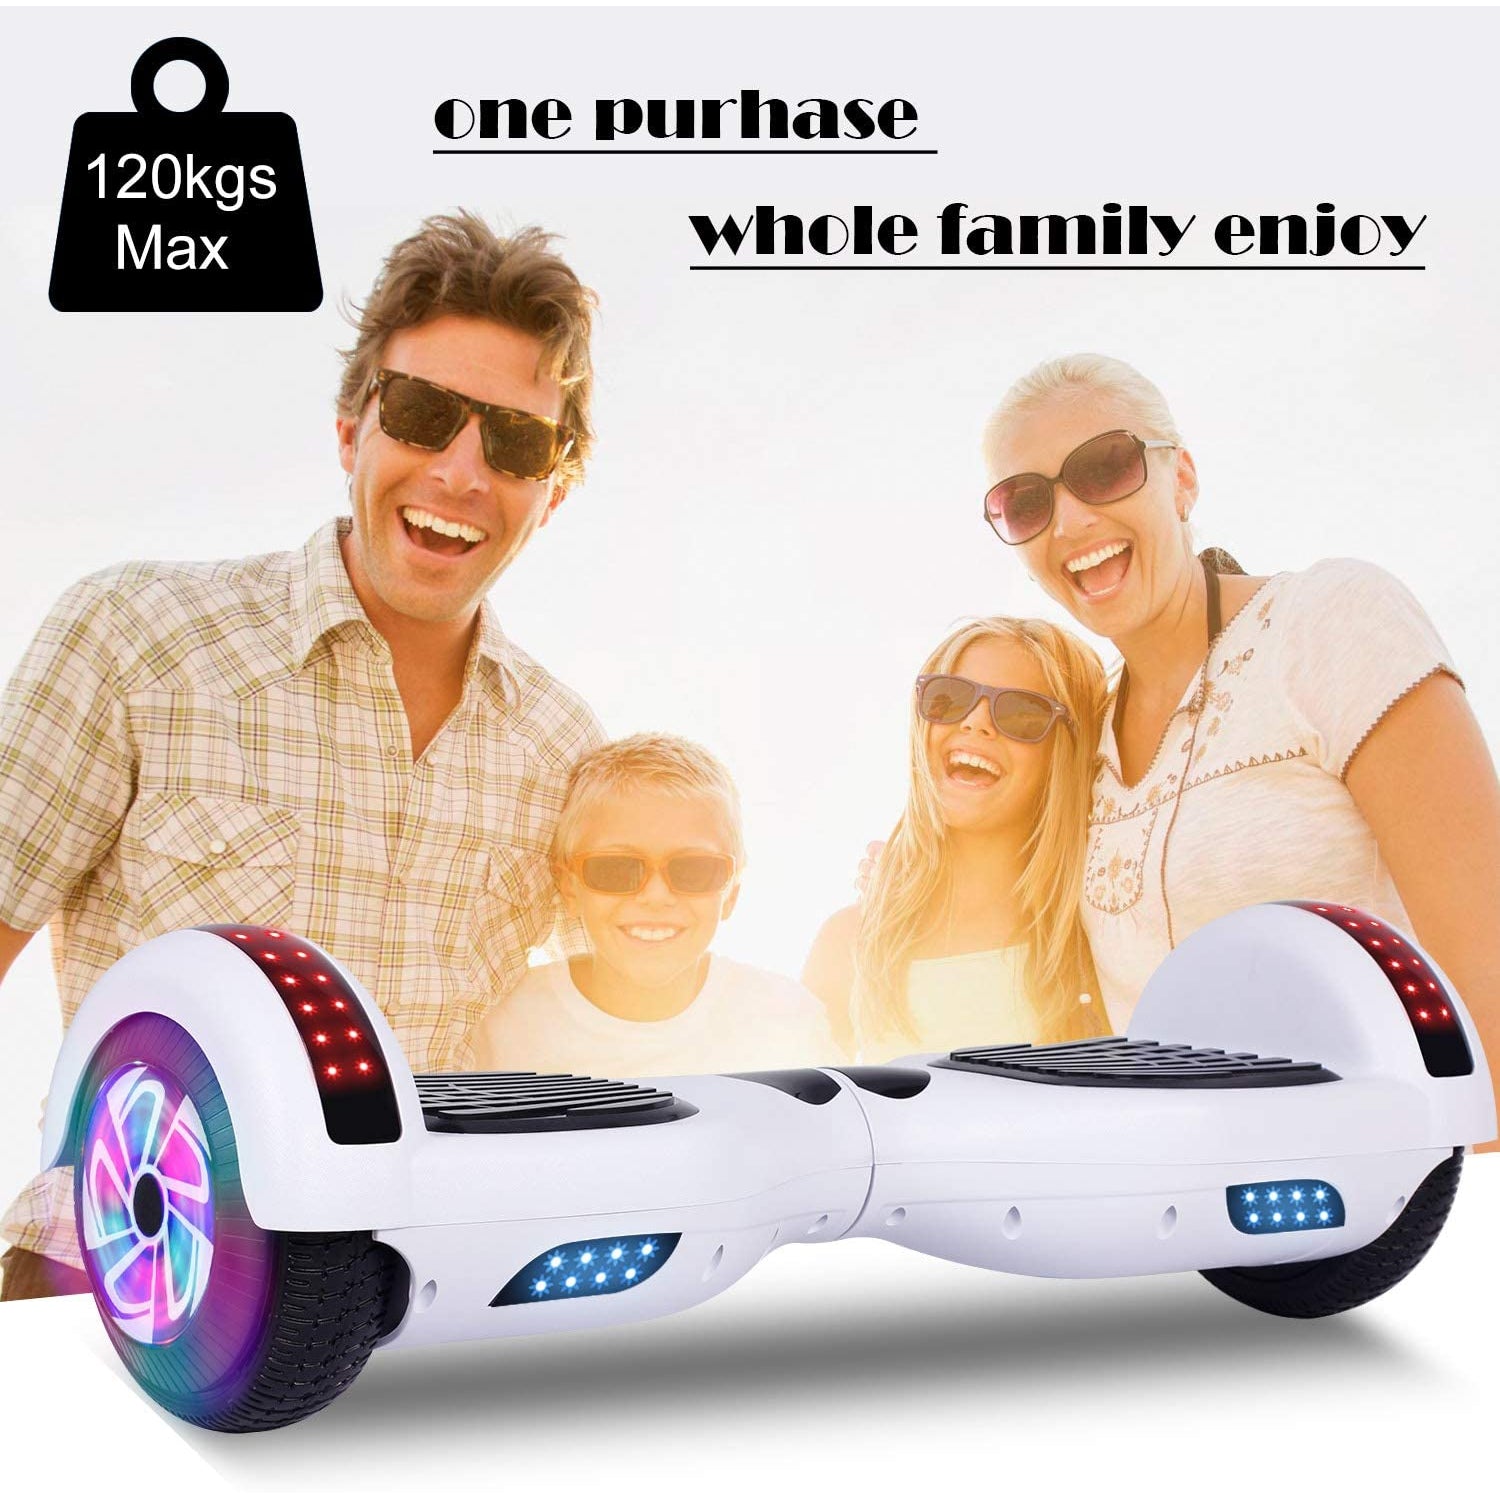 YHR Hoverboard, Self-Balancing Electric Scooter with LED Lights, 6.5" Hover Scooter